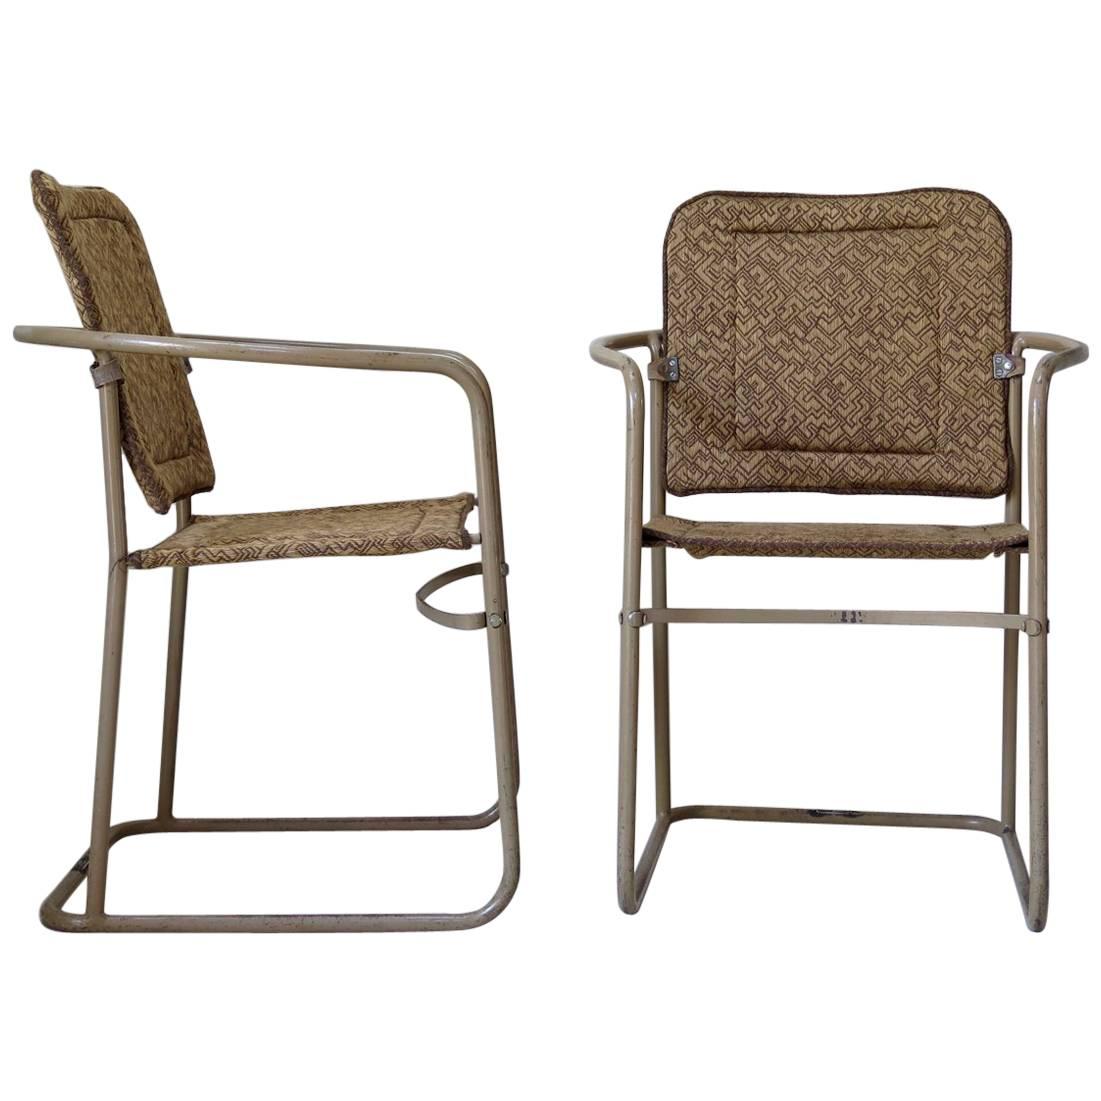 Pair of Tubular Metal Chairs, France, circa 1950s For Sale